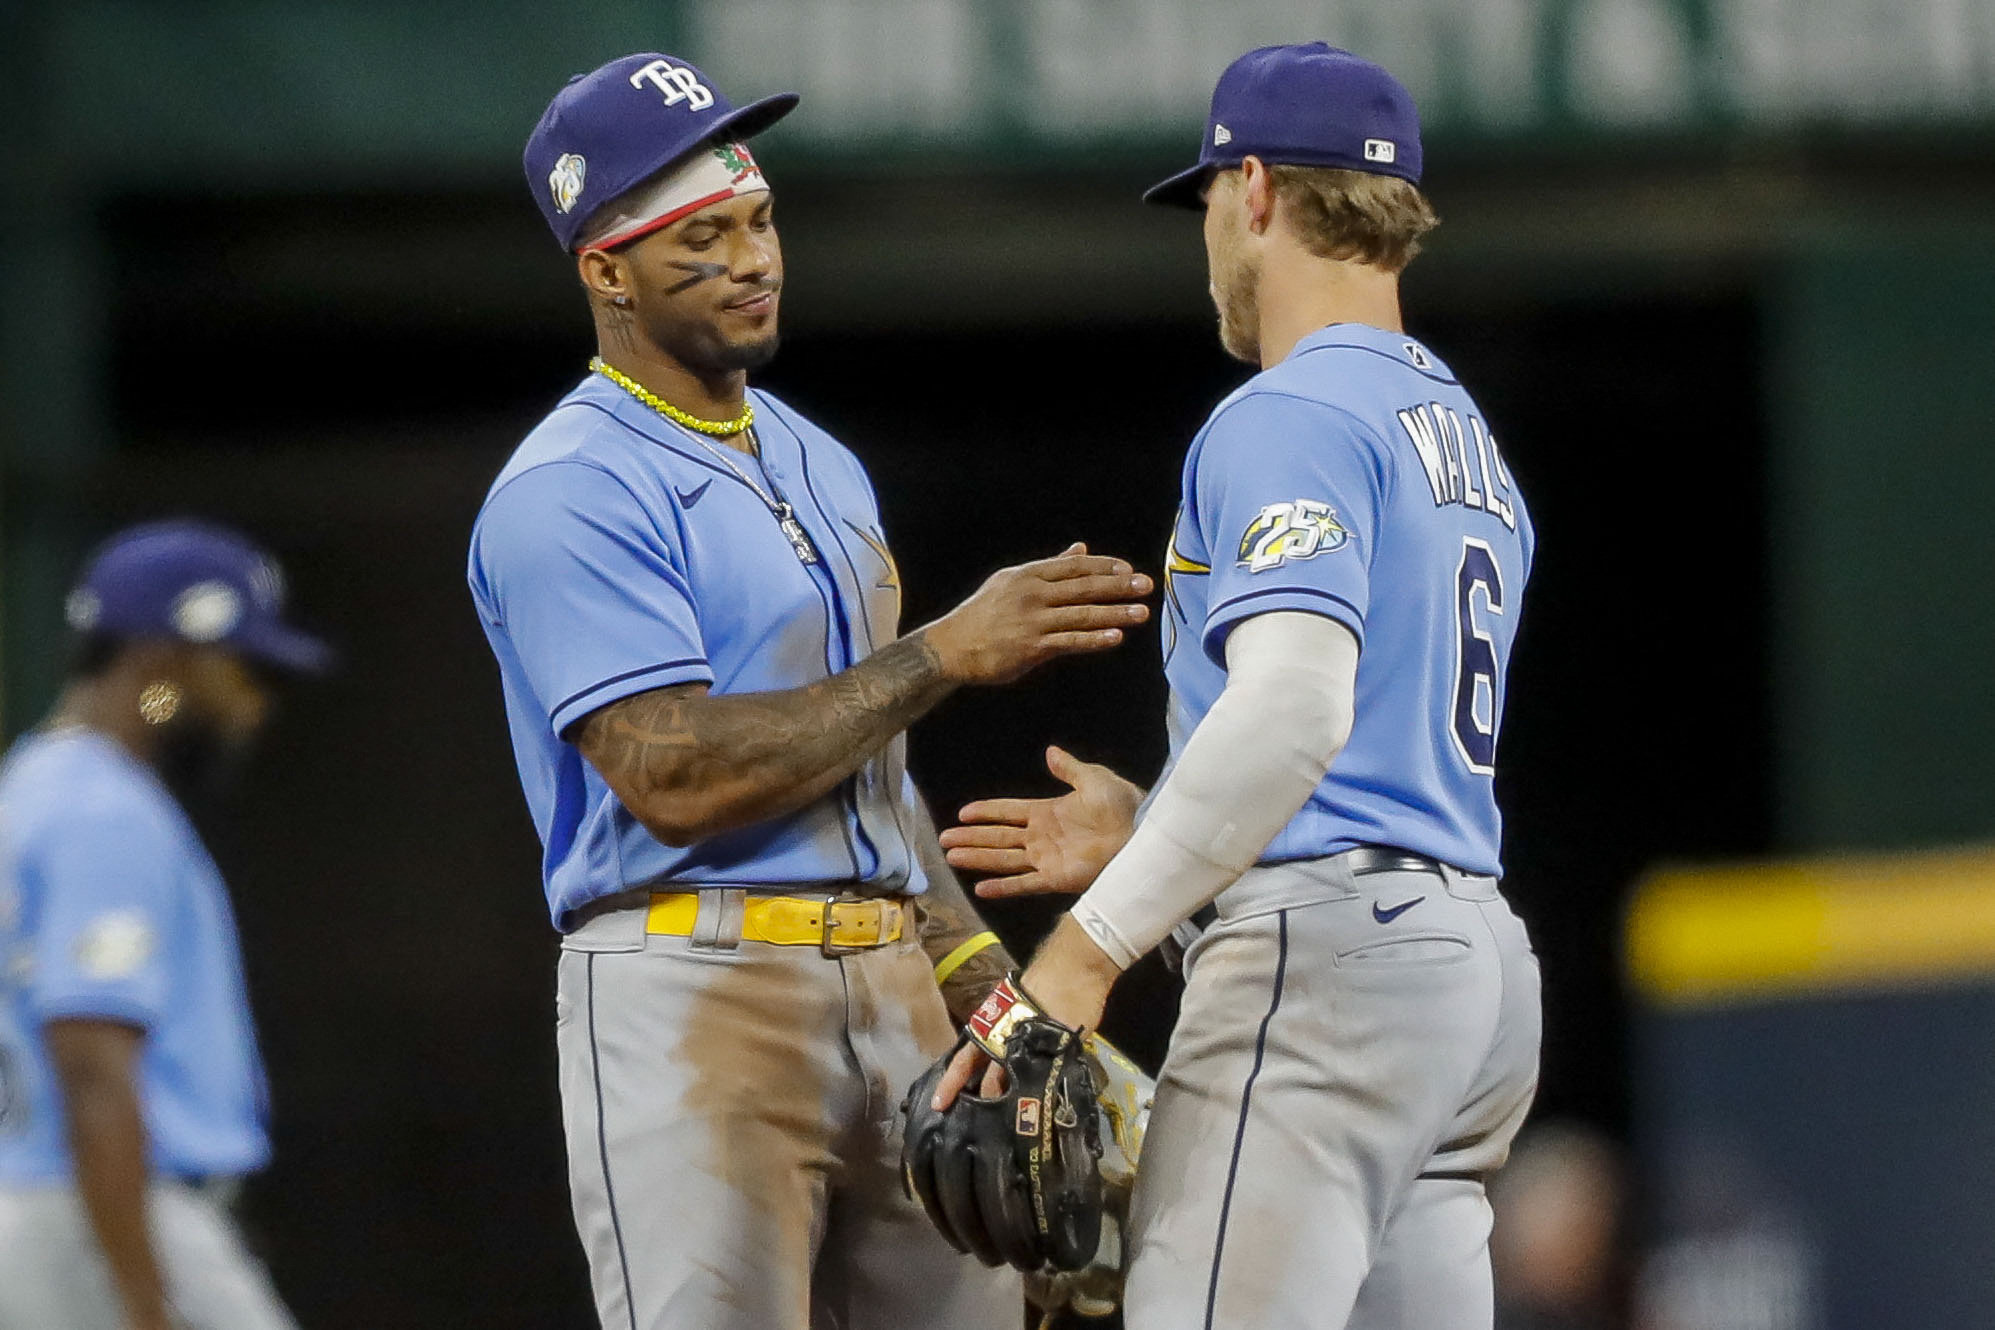 Taylor Walls' big night fuels Rays to 10-0 rout of Reds